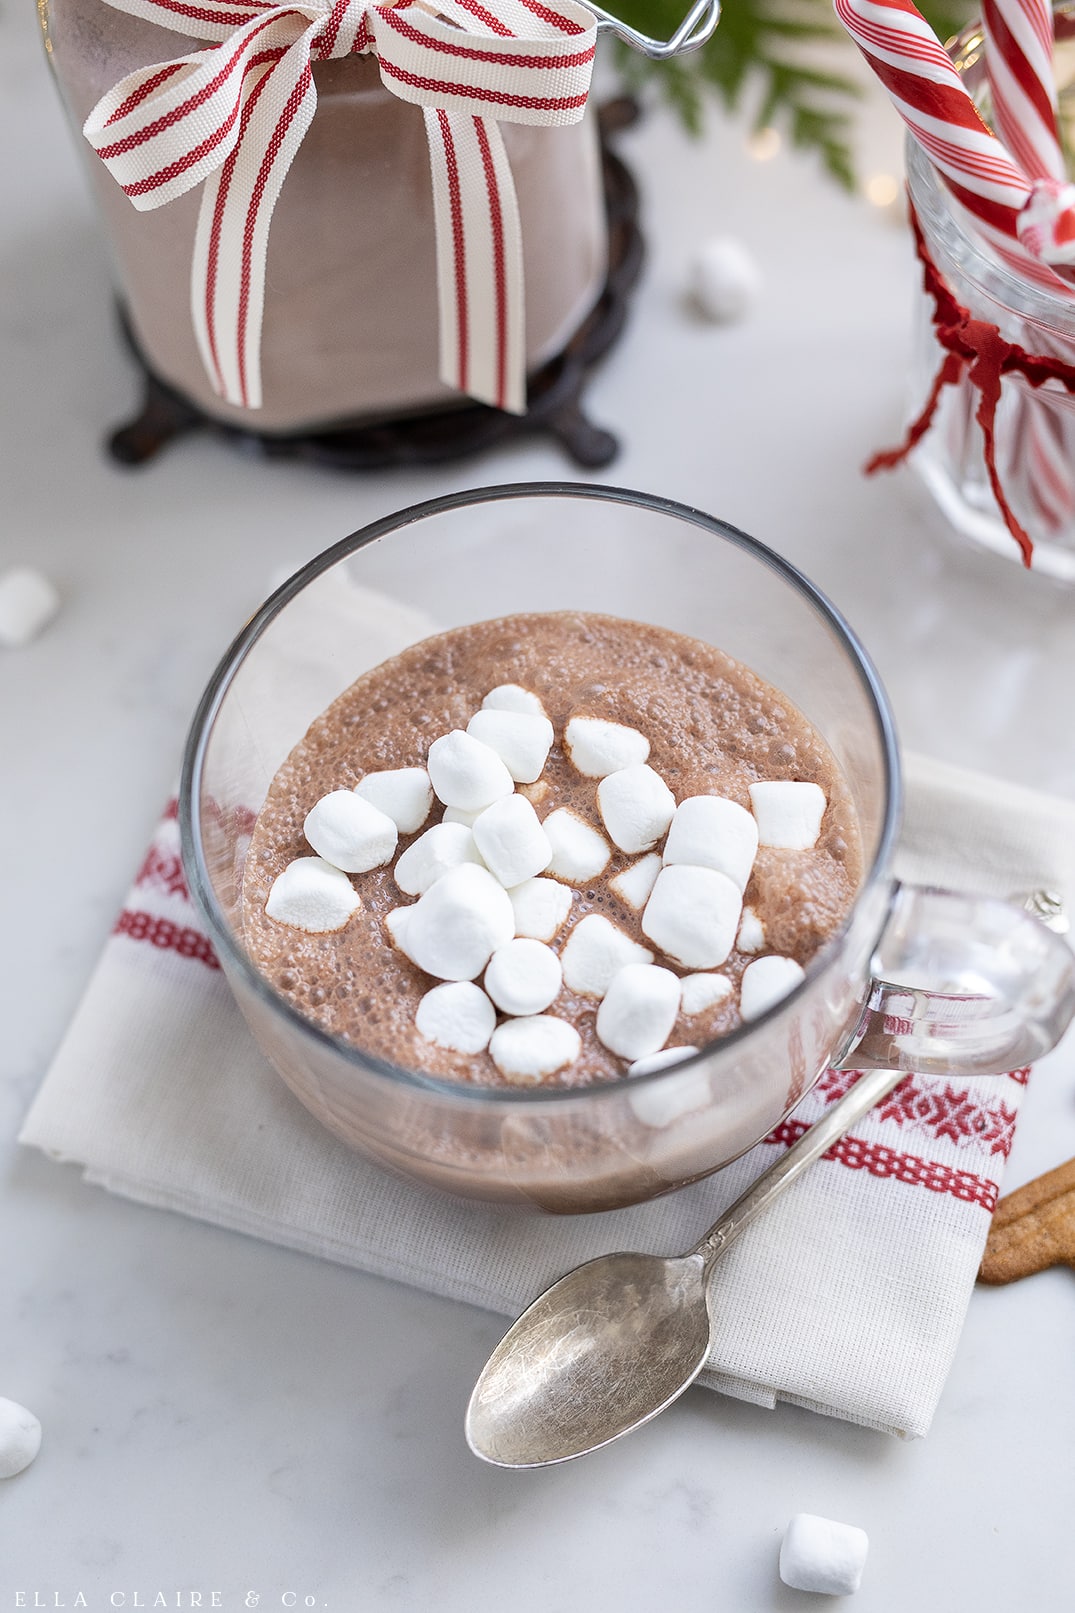 hot chocolate mix made fresh with marshmallows